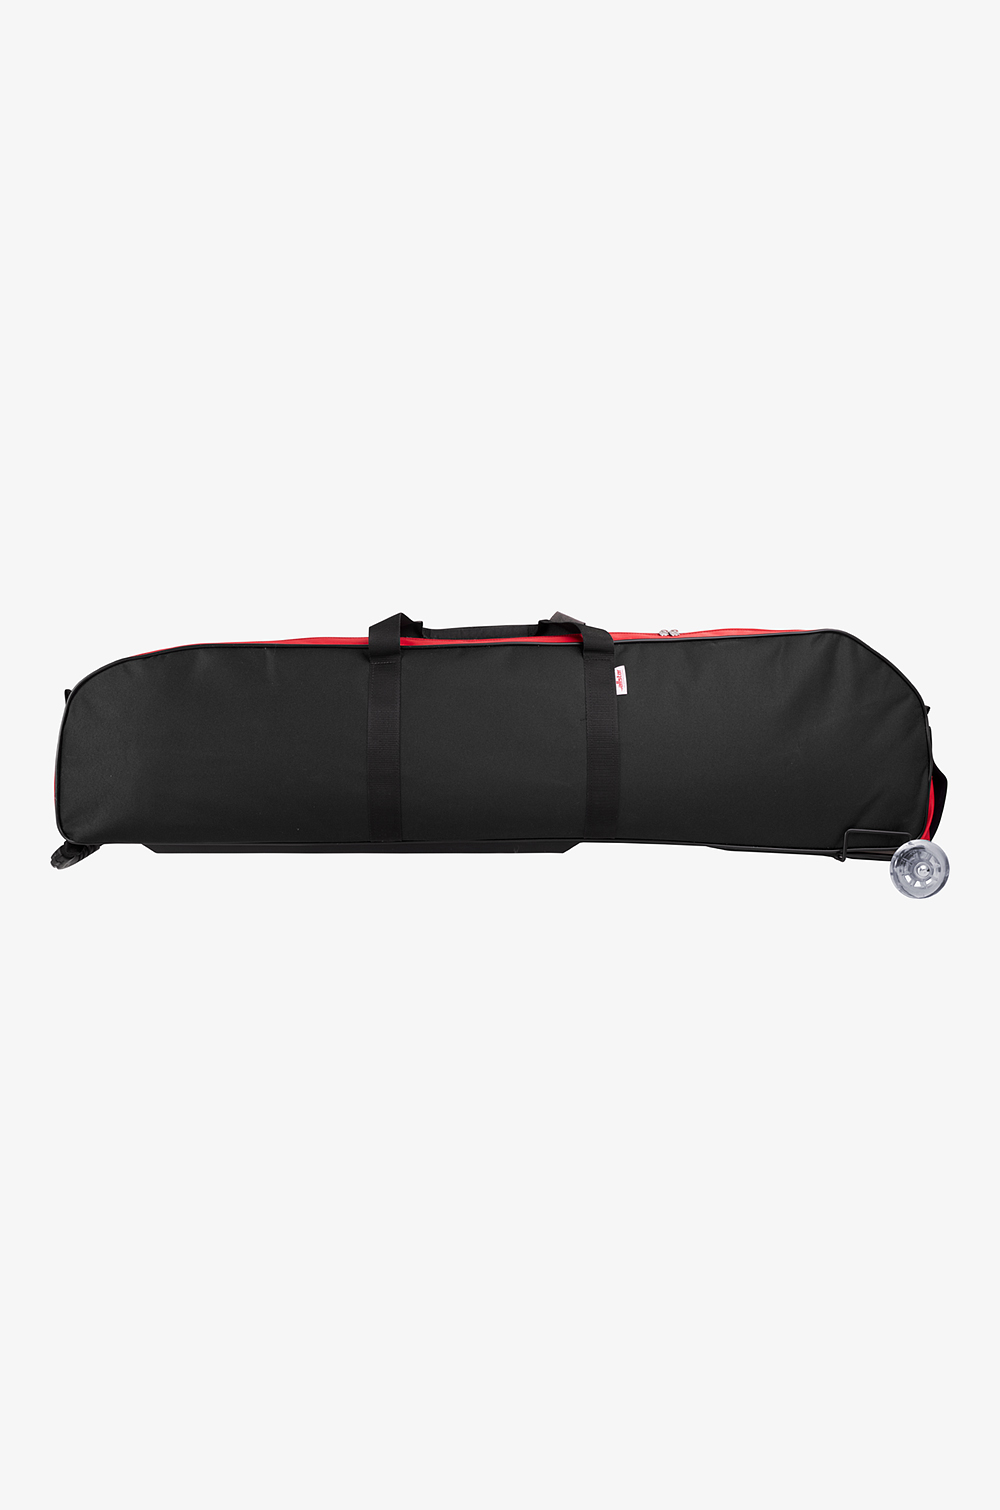 EcolineDuo Rollbag